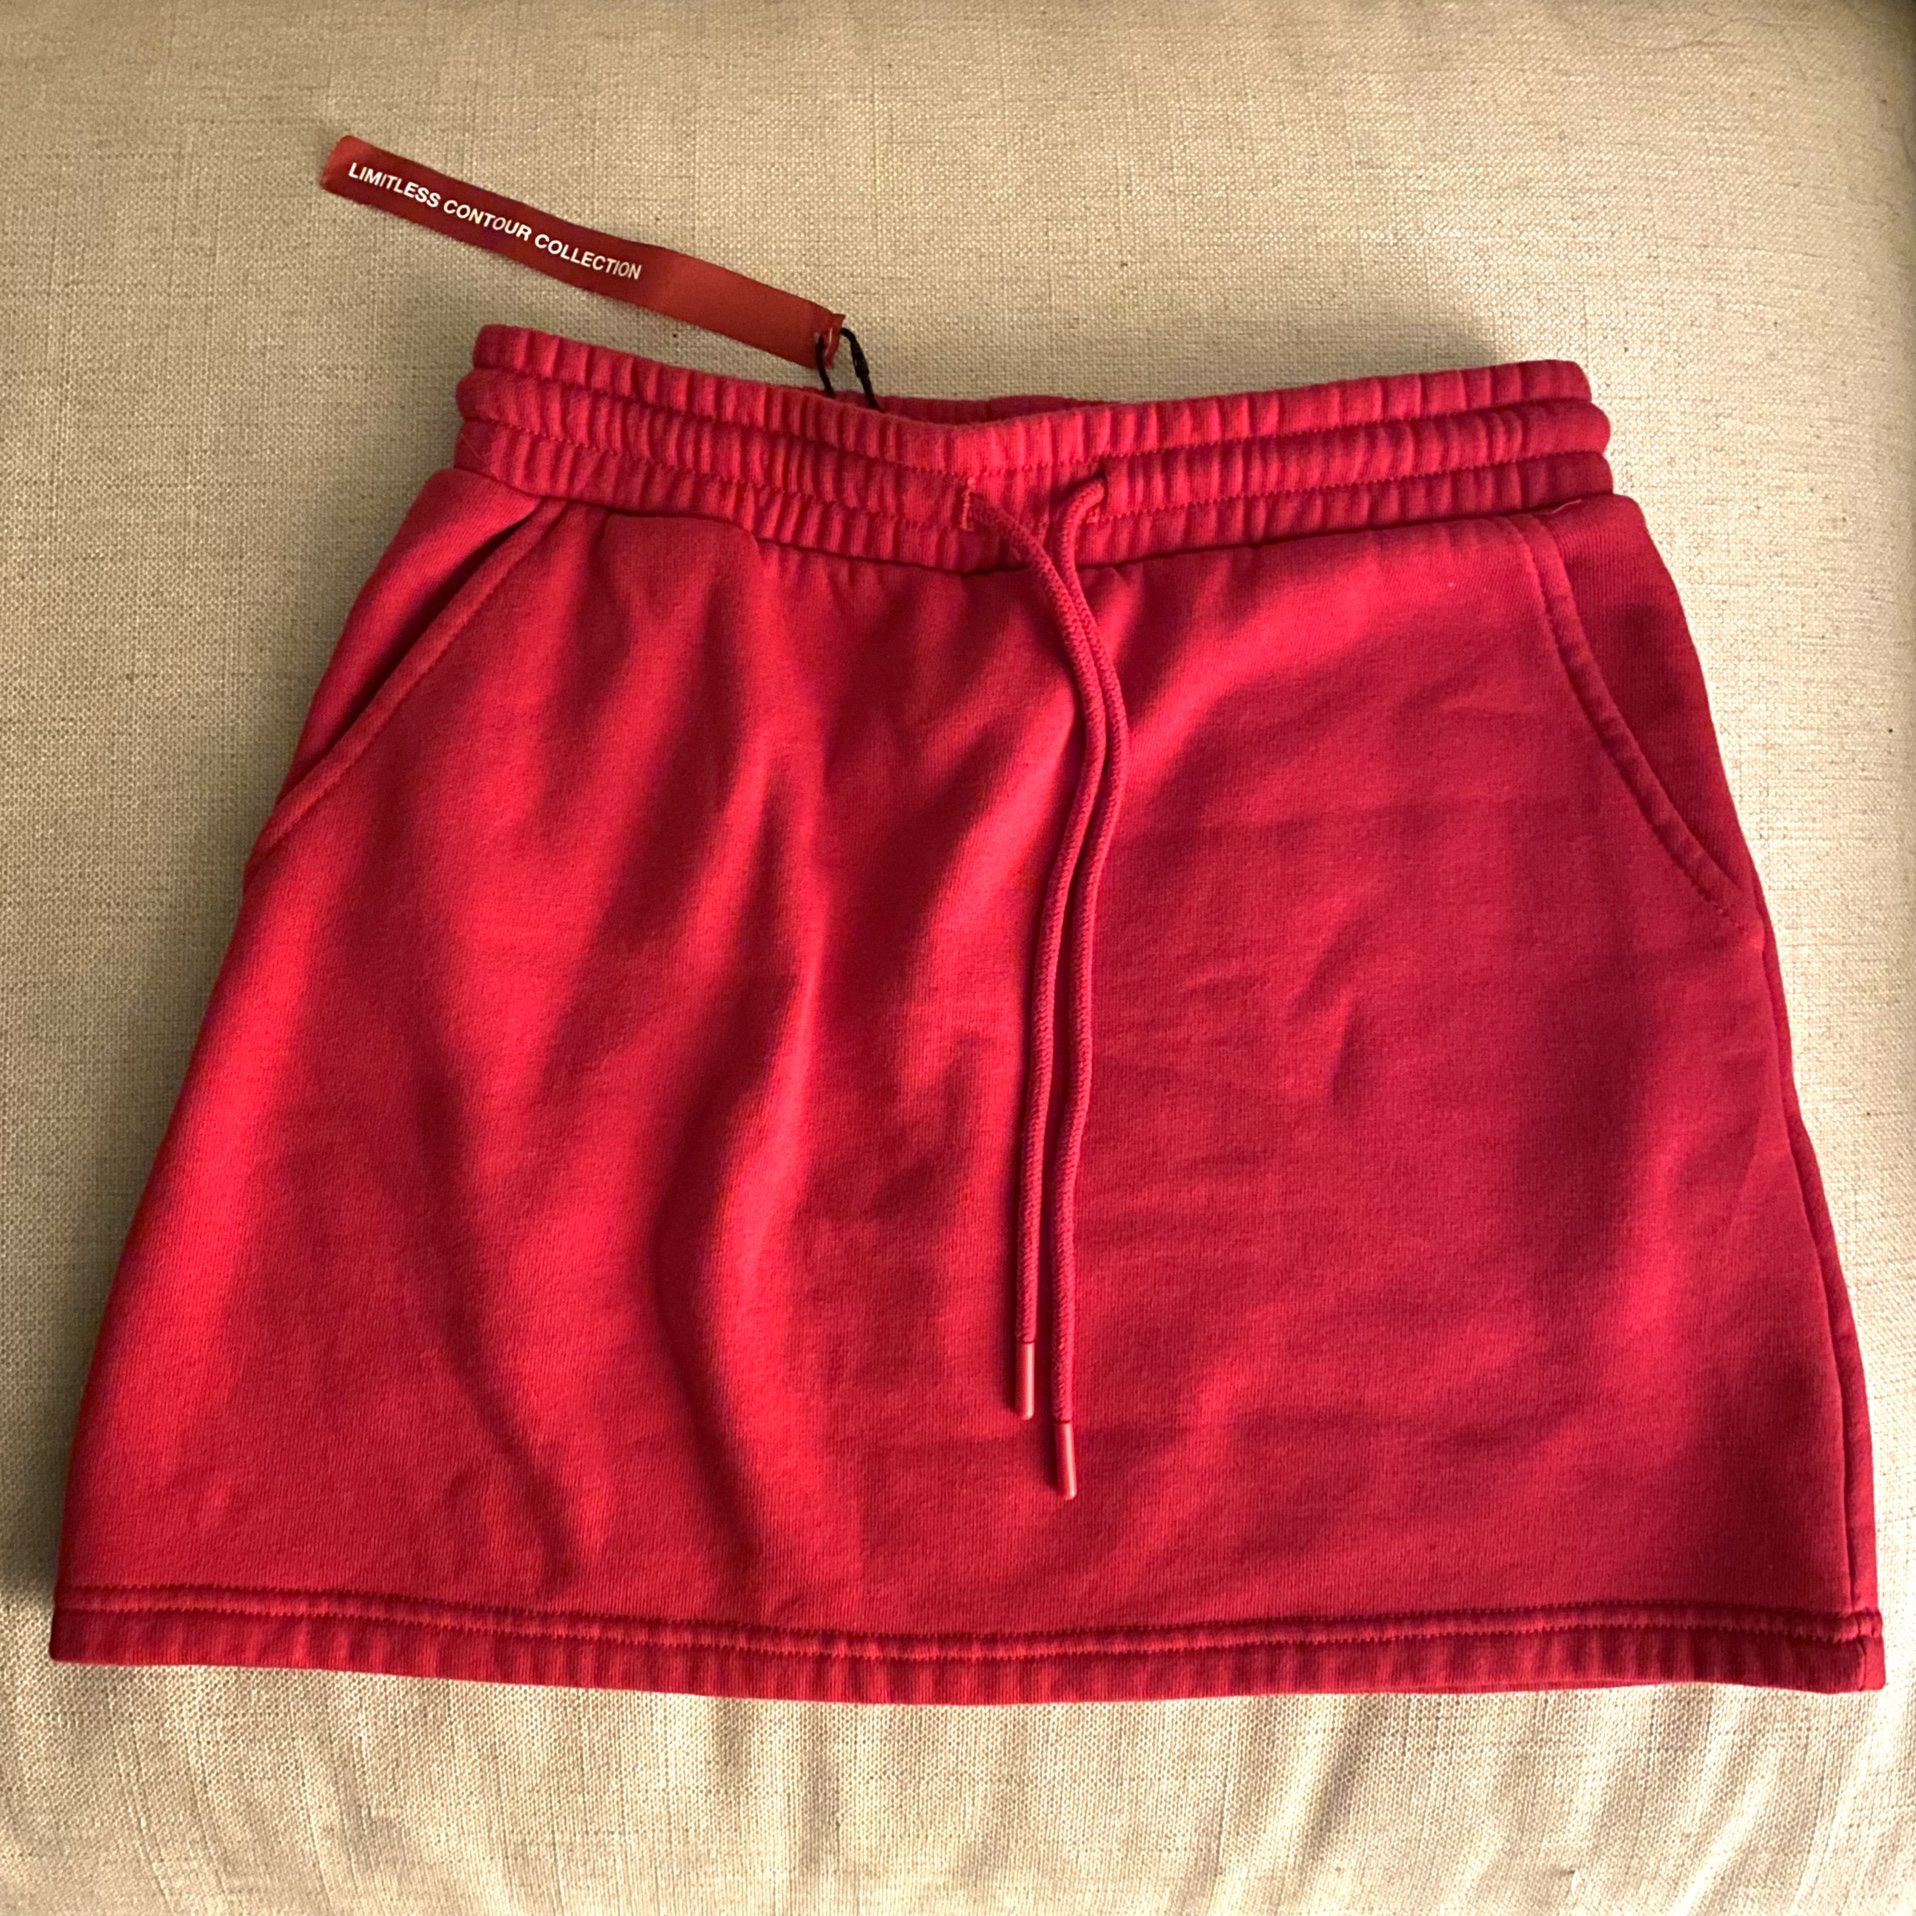 NEW Zara Limitless Contour Skirt Red (RETAIL $39.90) for Sale in